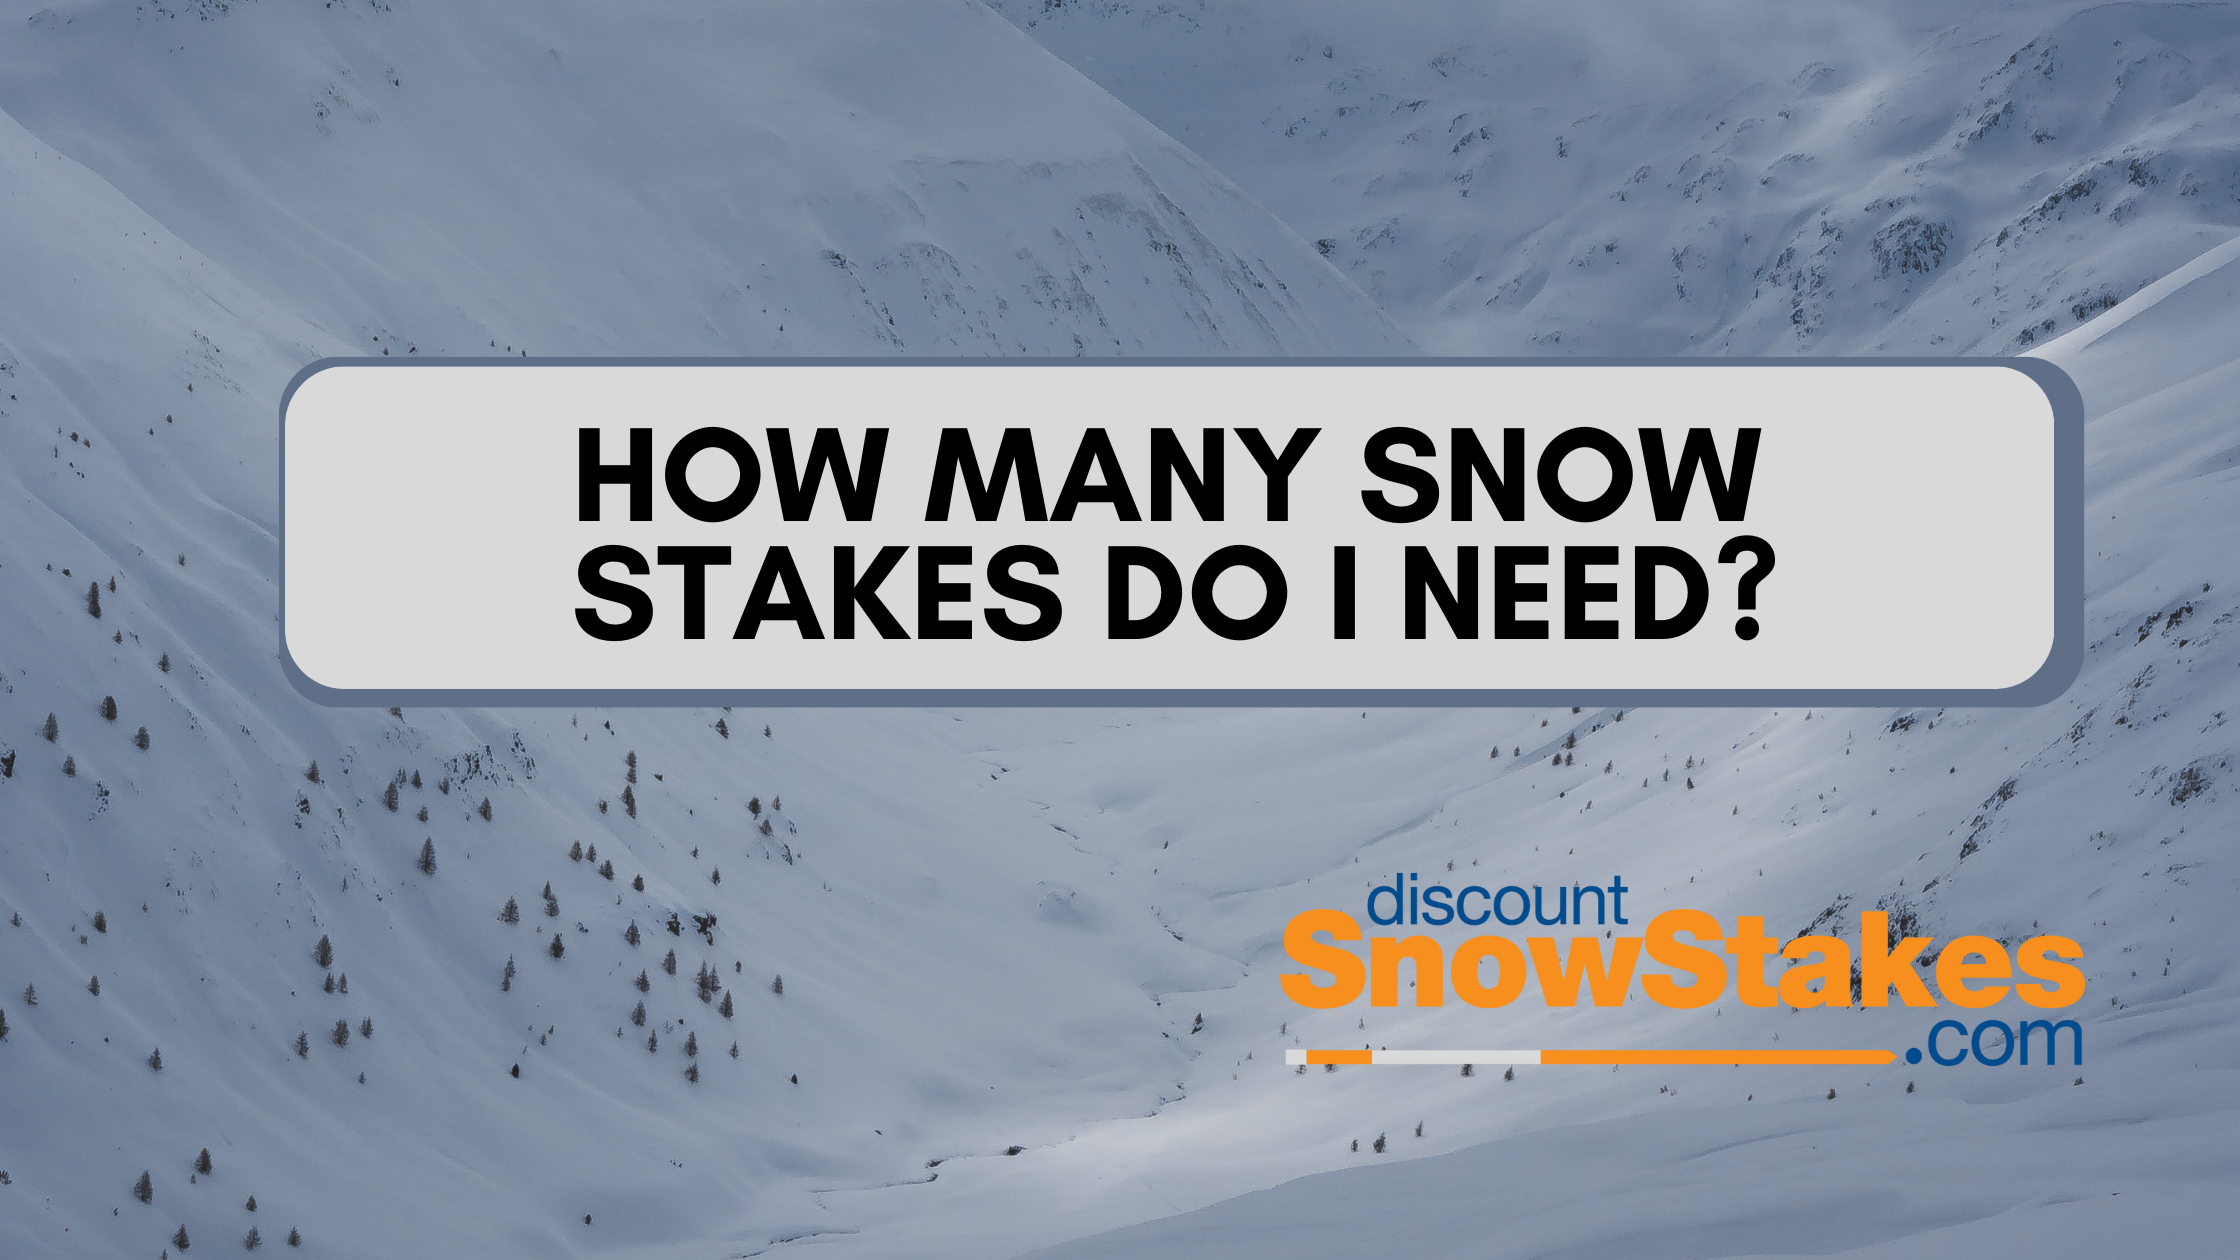 How Many Snow Stakes Do You Need?